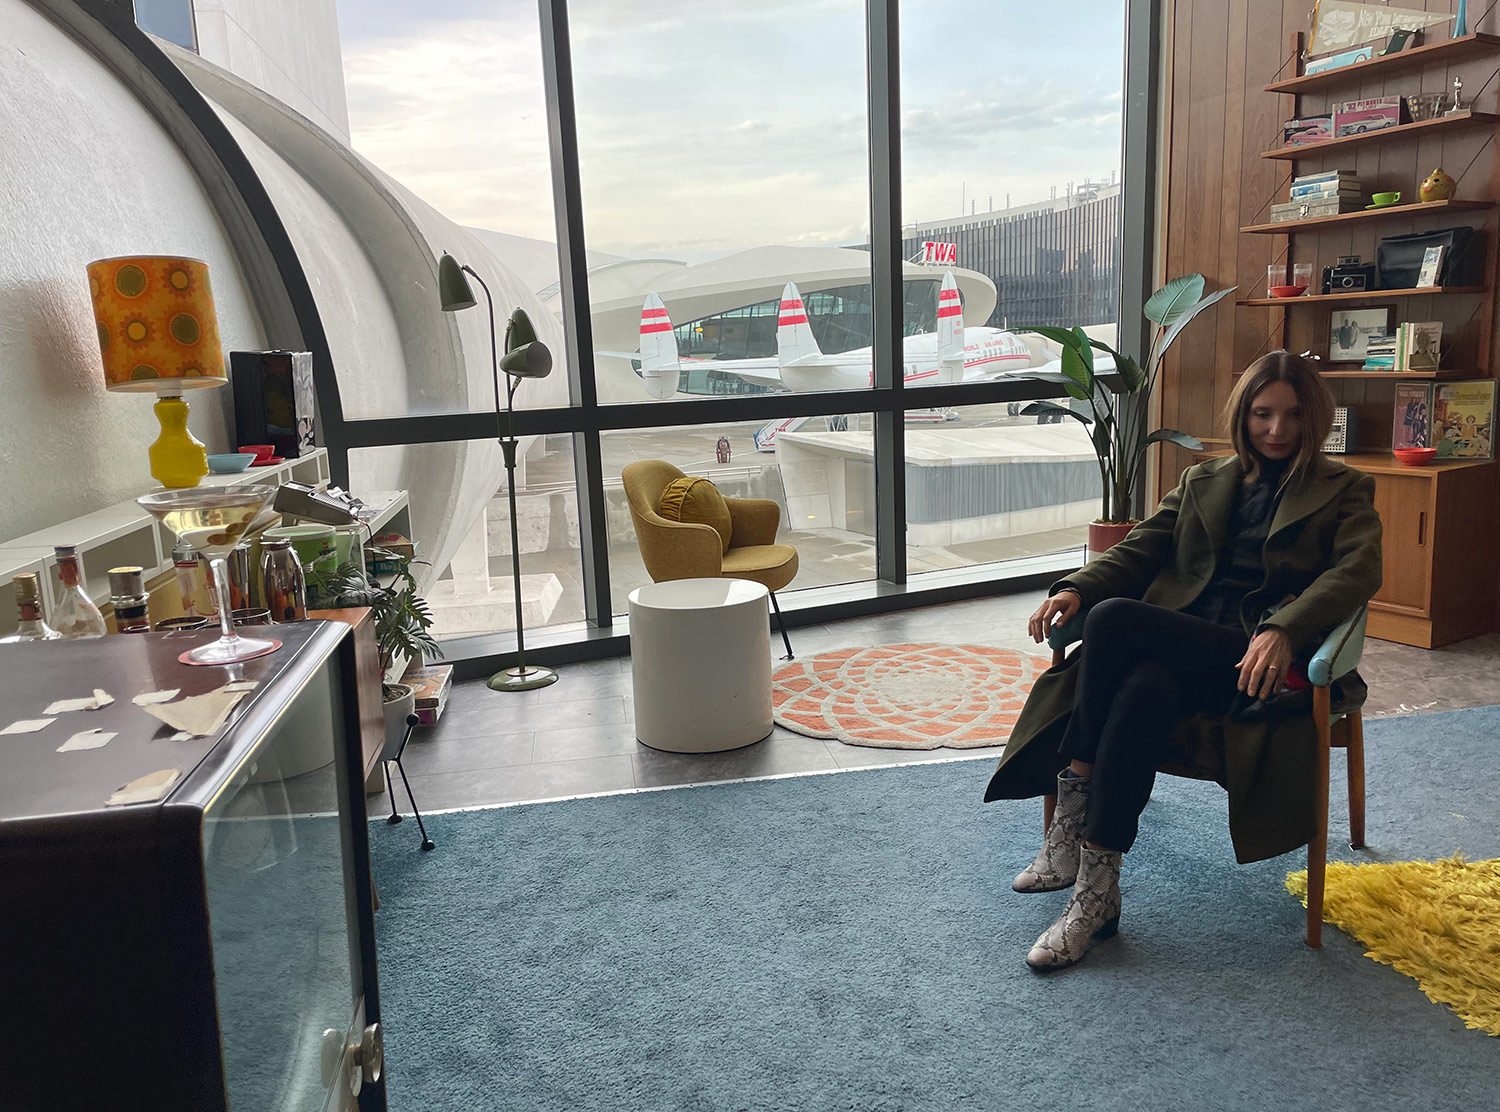 TWA Hotel Cute corner furnished with 1950-60s pieces